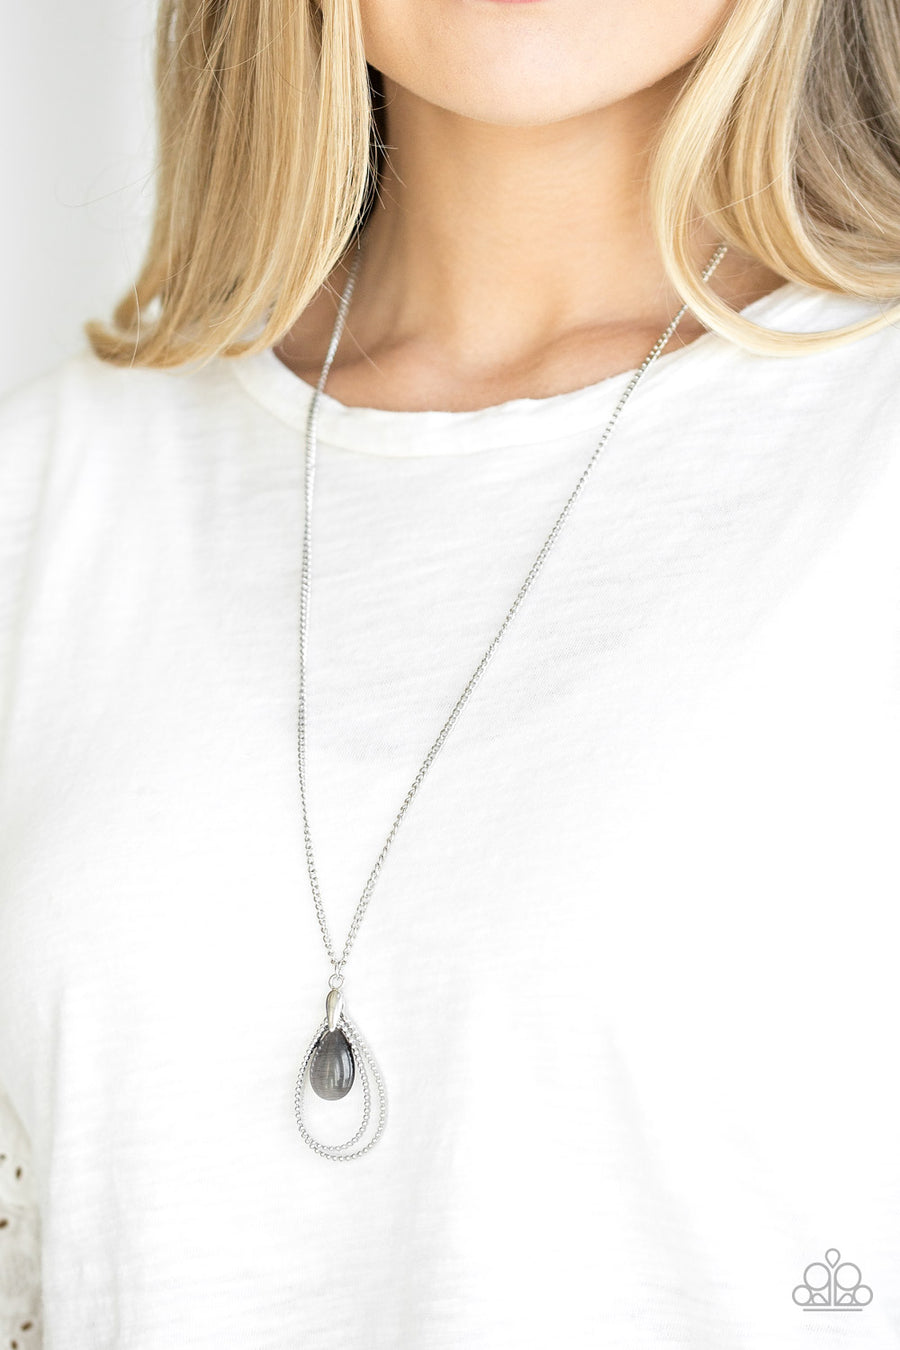 Teardrop Tranquility - Black and Silver Necklace - Paparazzi Accessories - Studded silver teardrops swing from the bottom of a shimmery silver chain. A glowing black moonstone attaches to the innermost frame, creating a whimsical pendant.